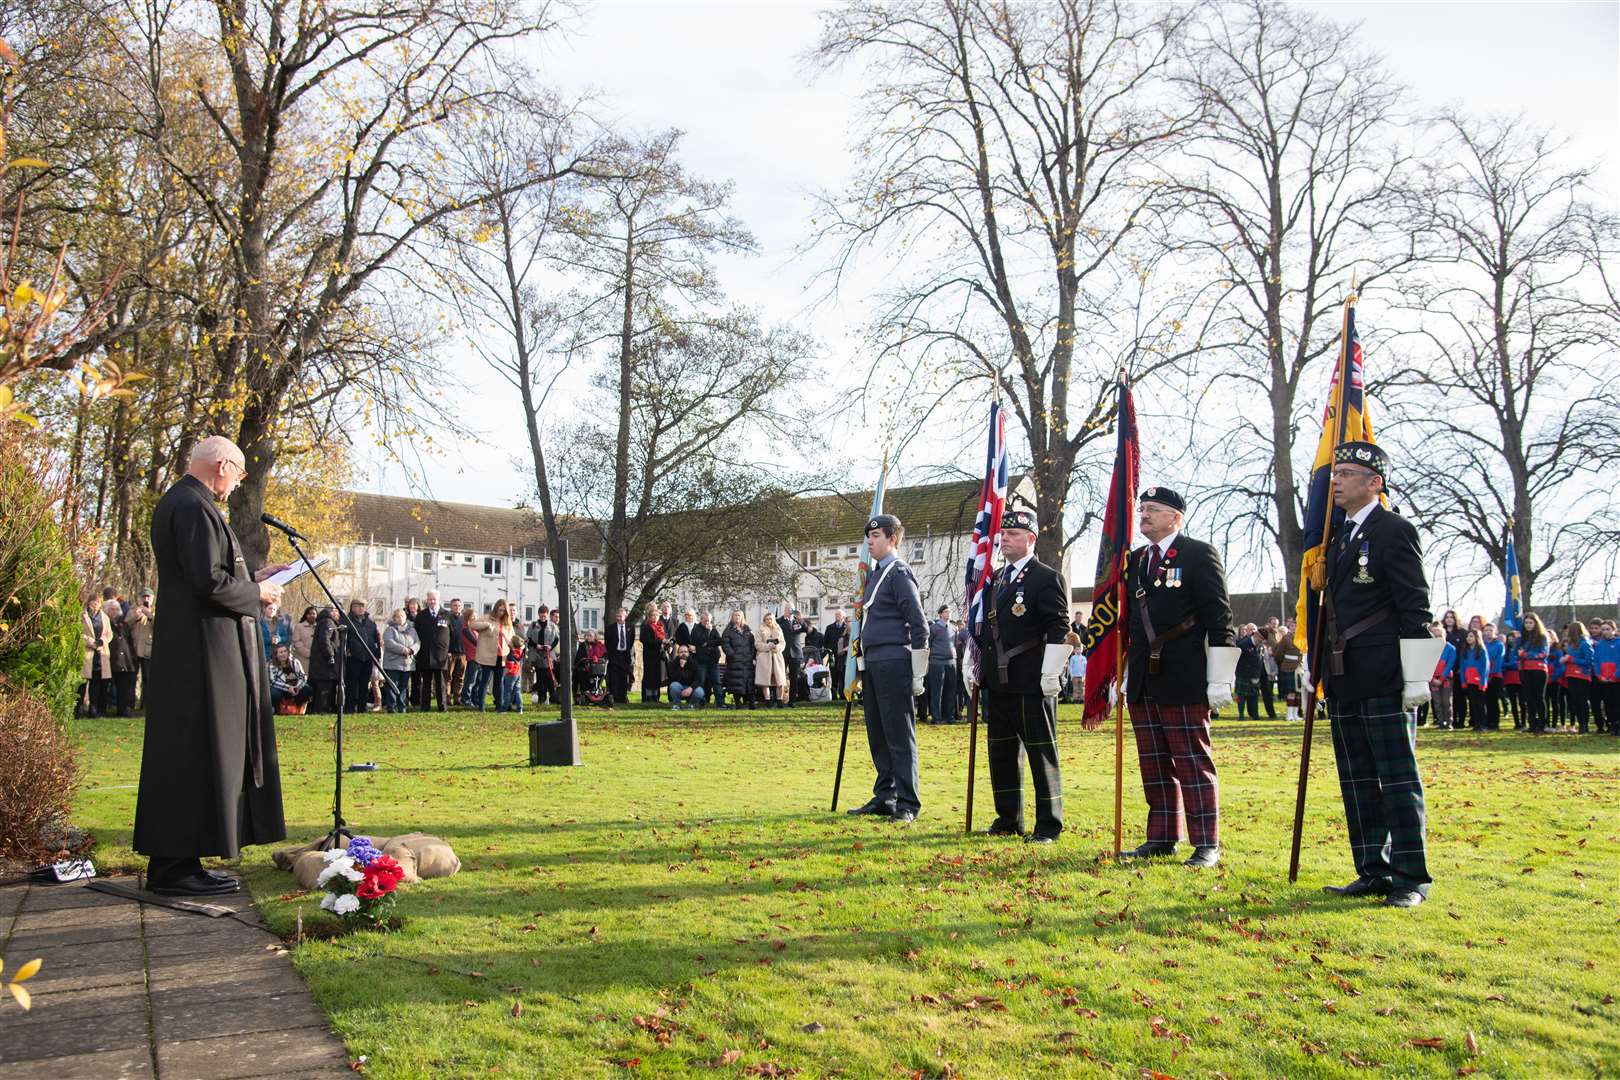 Reverend Donald Prentice and Standard Bearers during the service on Market Green. Picture: Daniel Forsyth